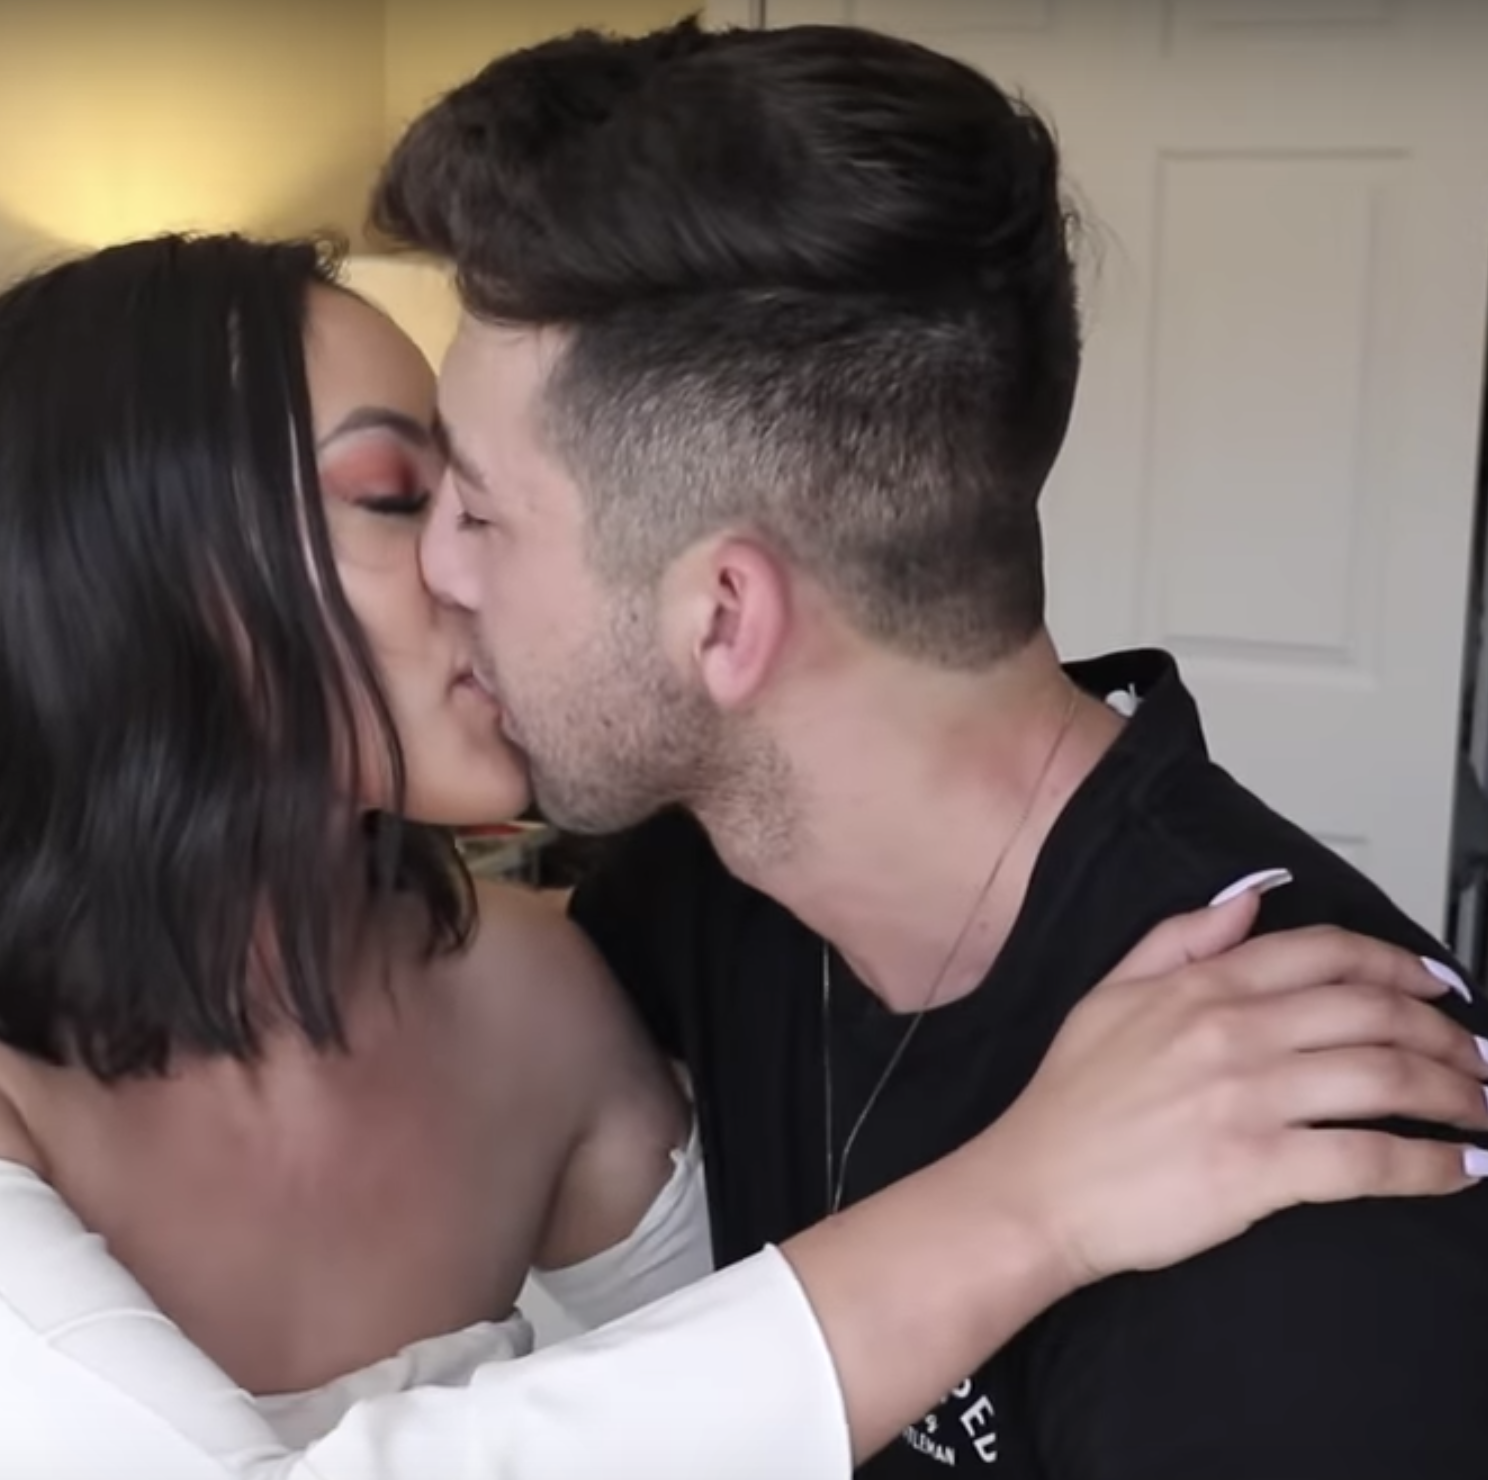 YouTuber horrifies fans after kissing his sister in latest 'prank' video